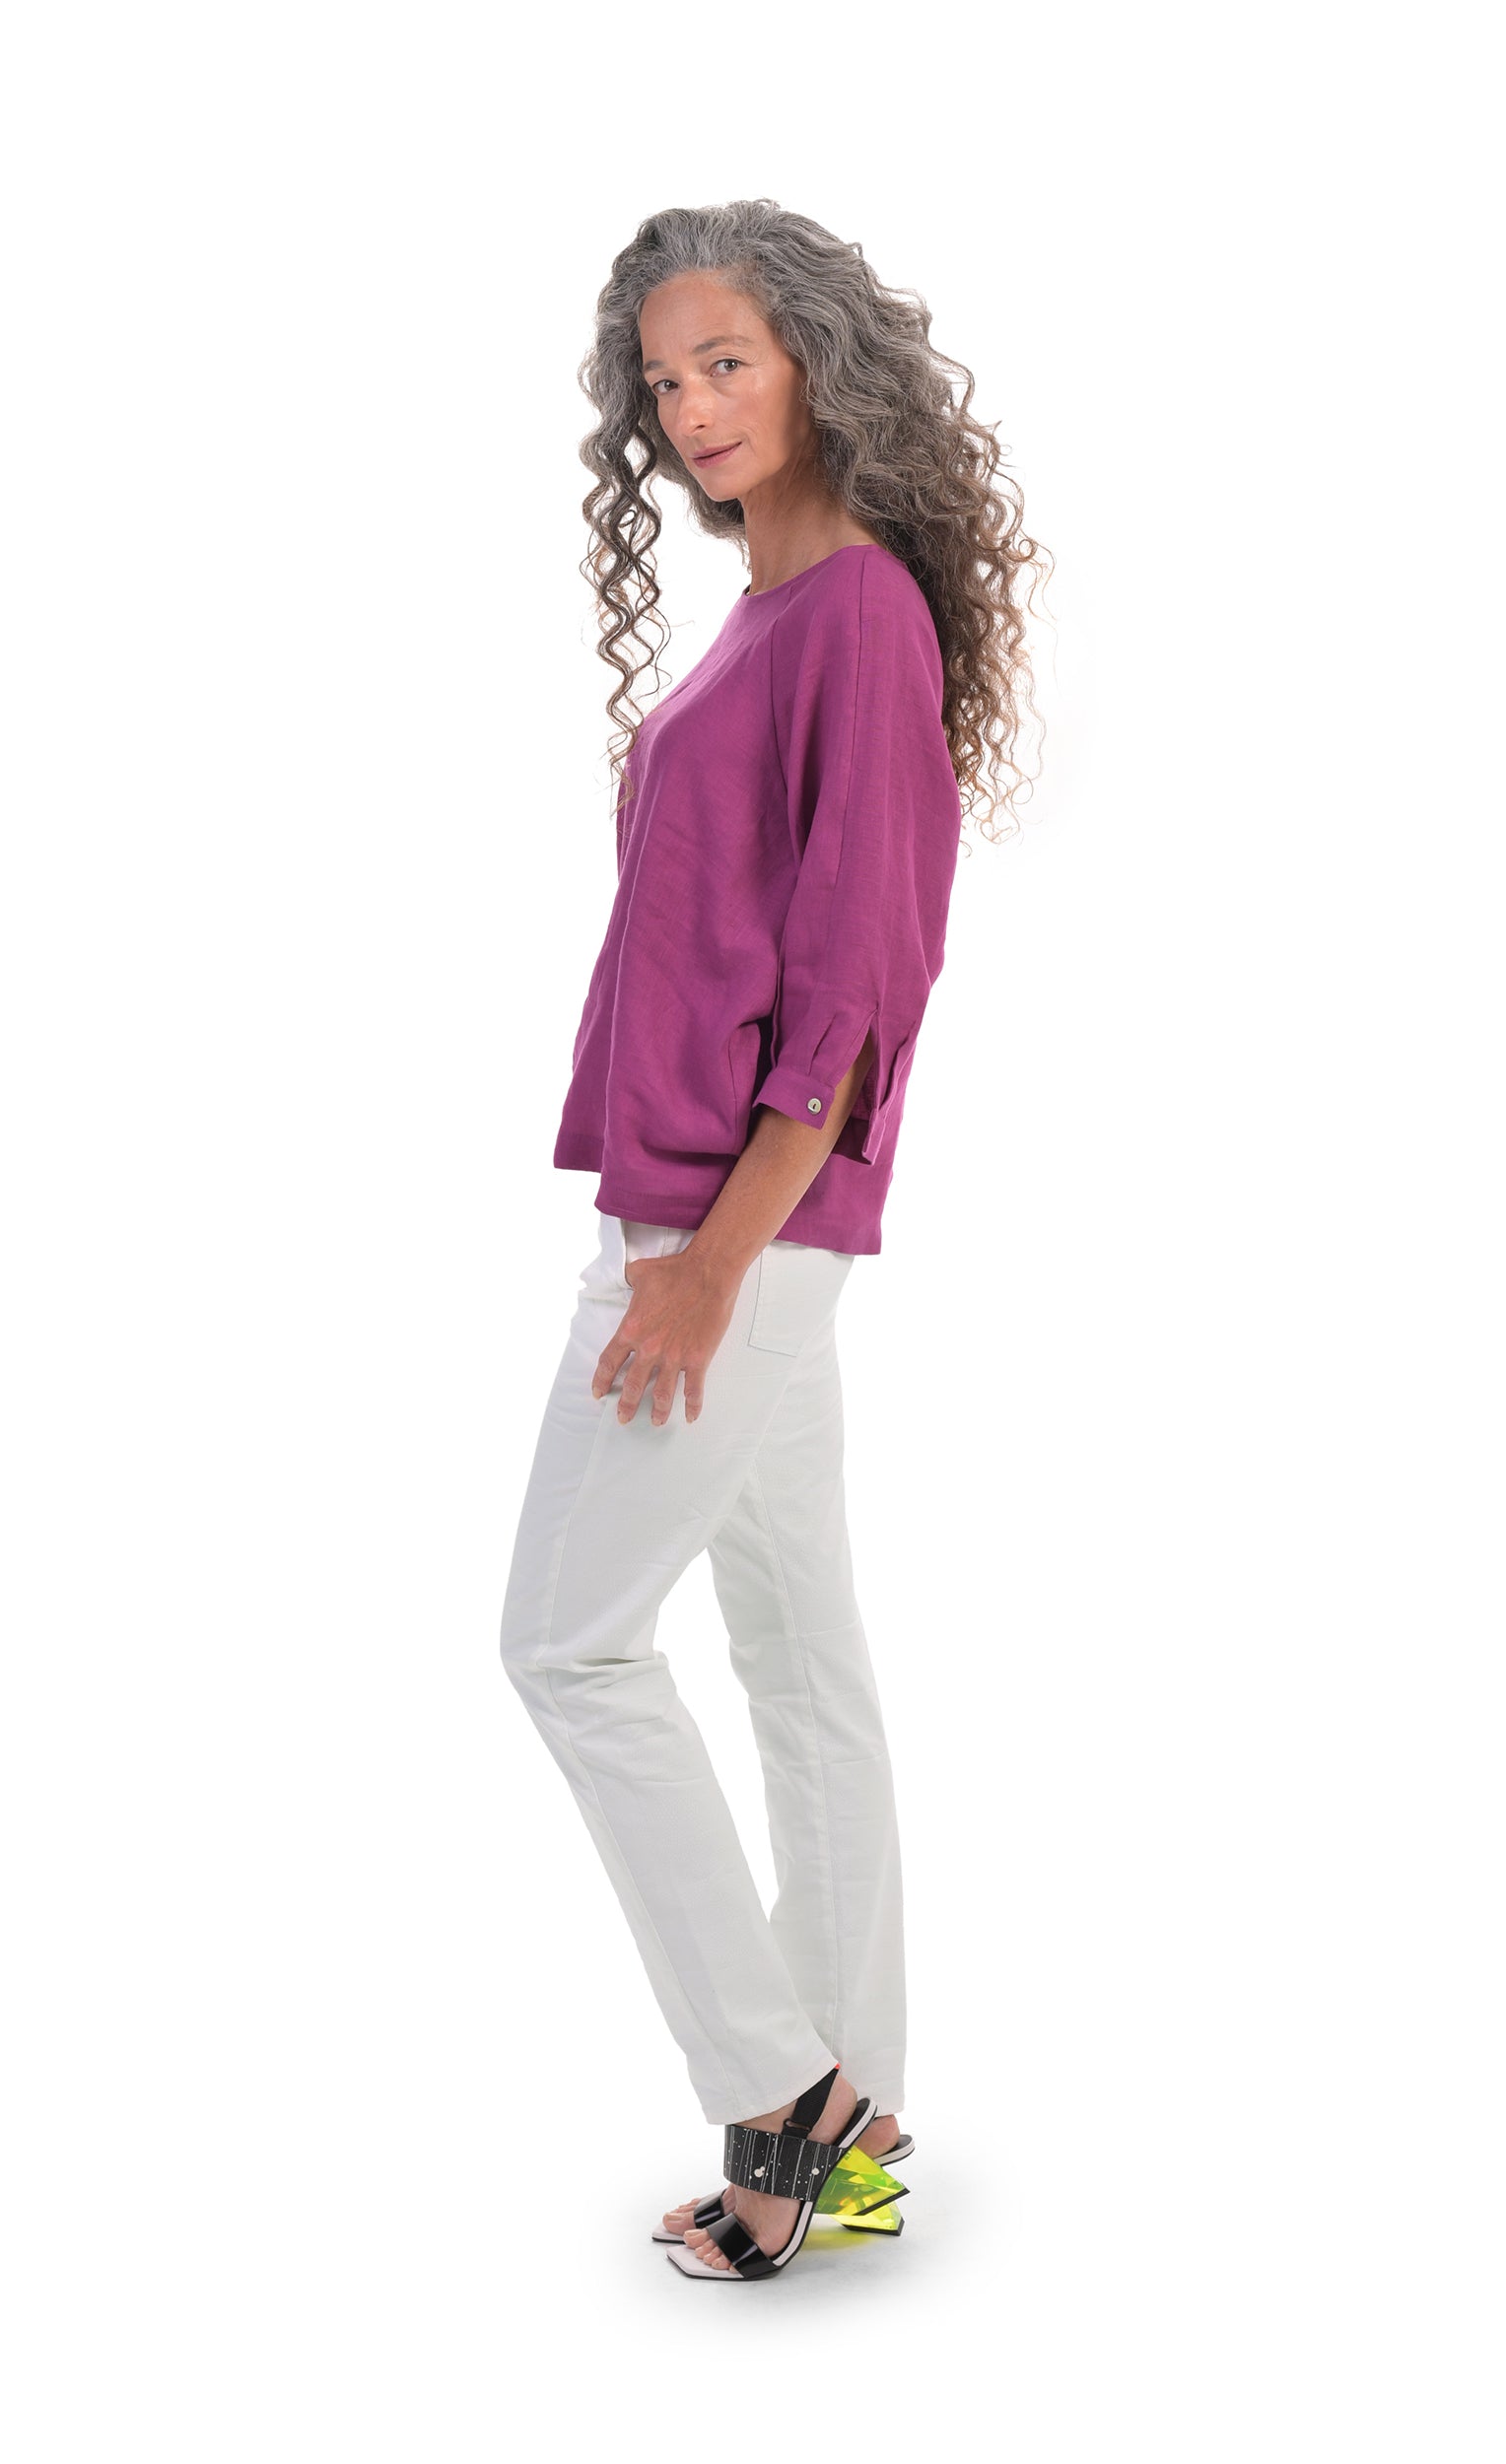 Left sided, full body view of a woman wearing a pink top and the alembika stretch denim pant. This pant is white with two front slant pockets. The pants have a relaxed skinny silhouette.